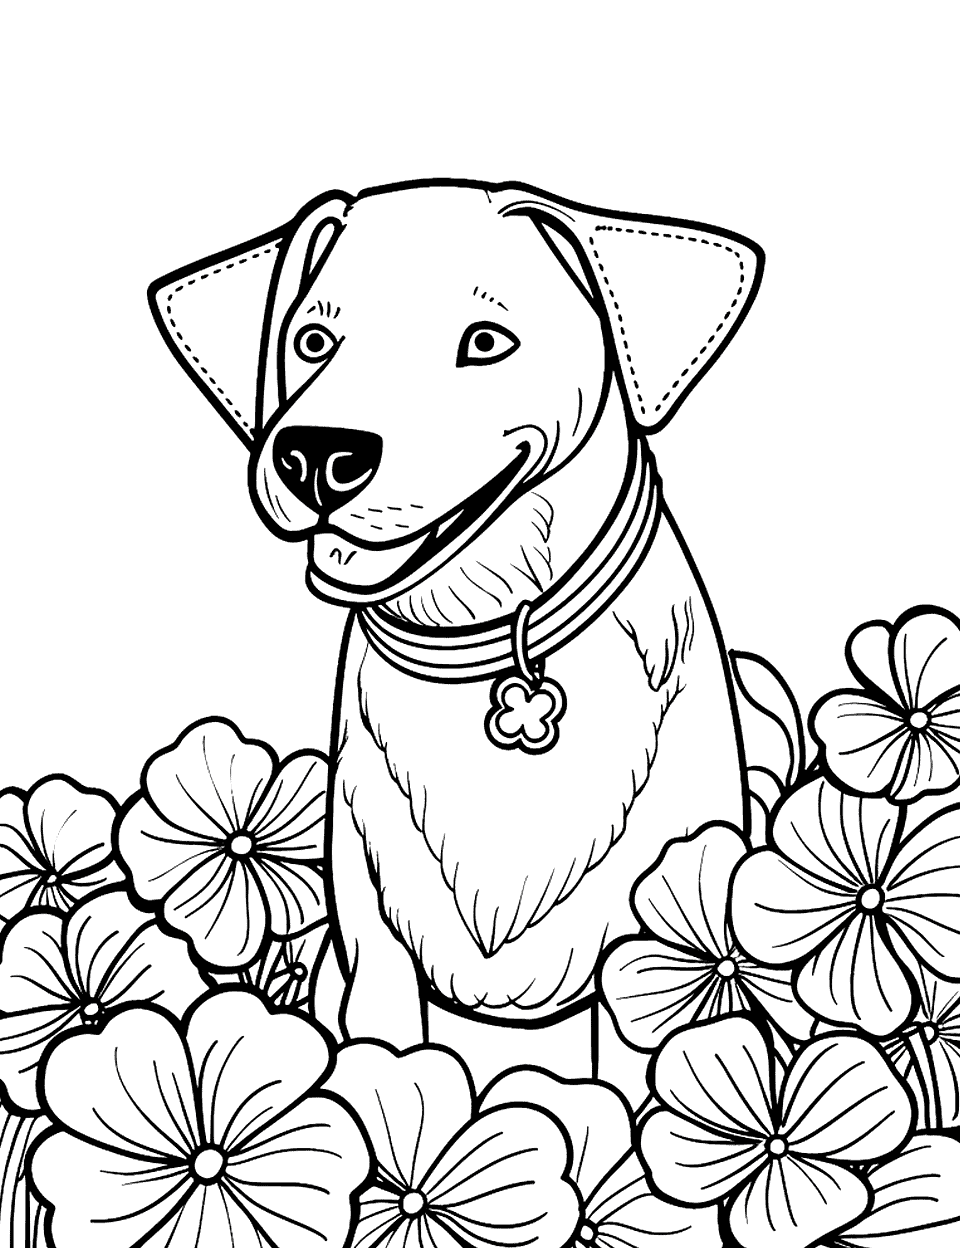 Dog Wearing a Shamrock Collar Coloring Page - A happy dog with a shamrock-themed collar sitting in a field of clovers.